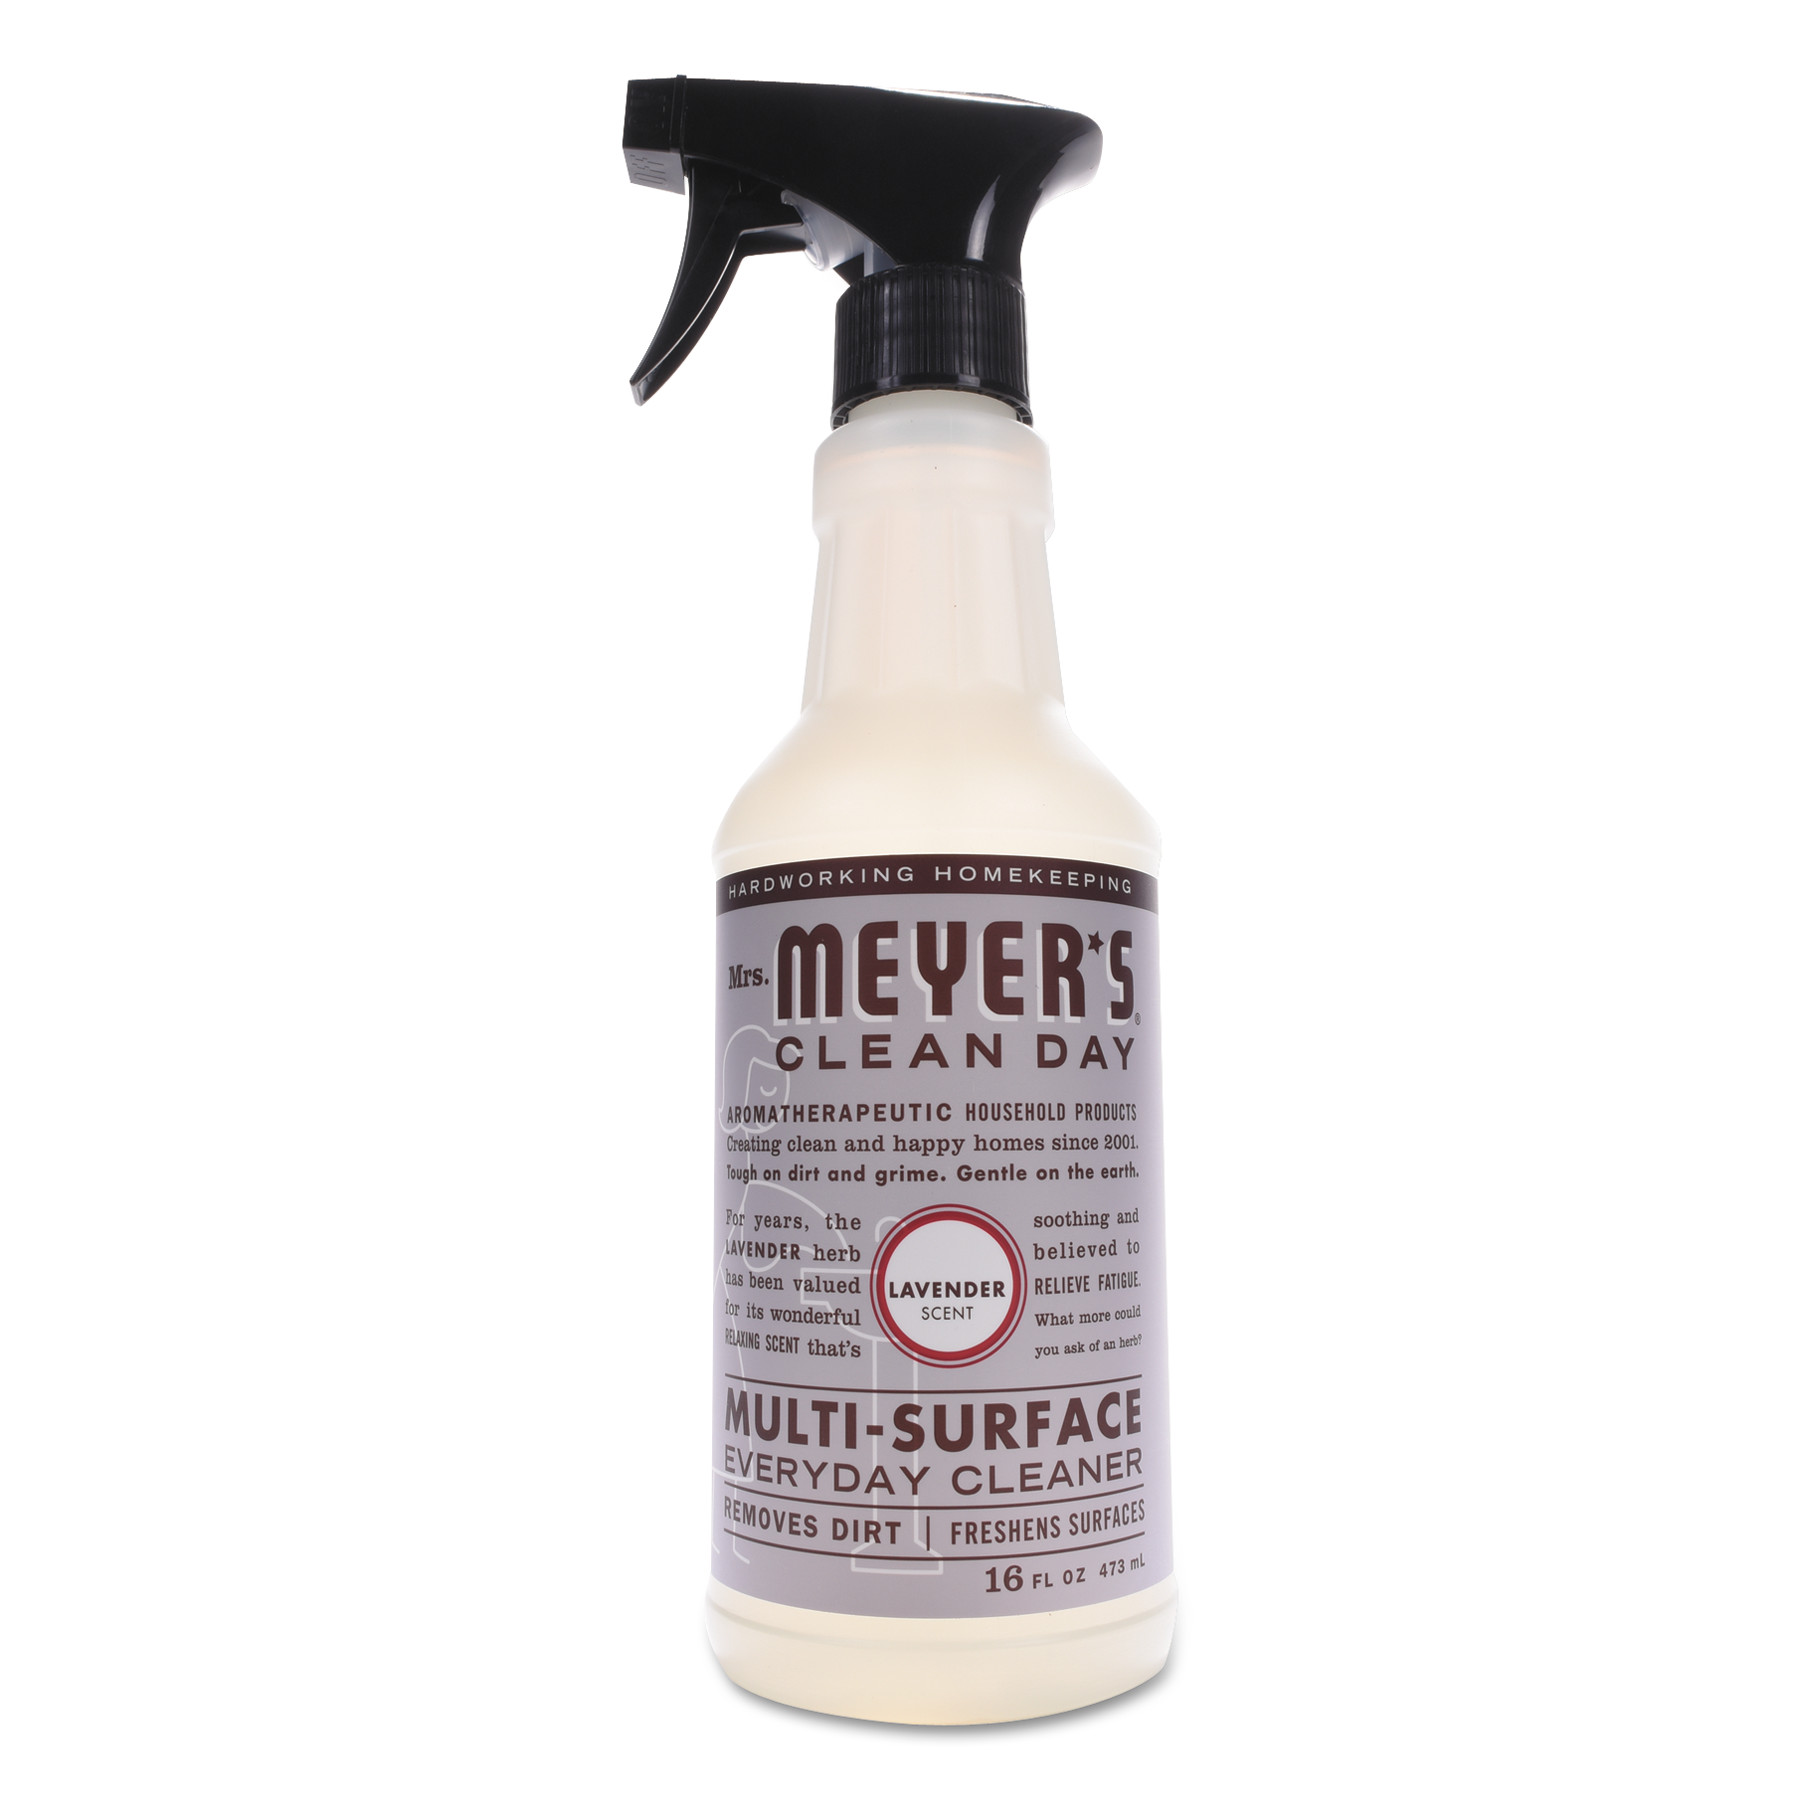 Sprayway - Crazy Clean All Purpose Cleaner 30